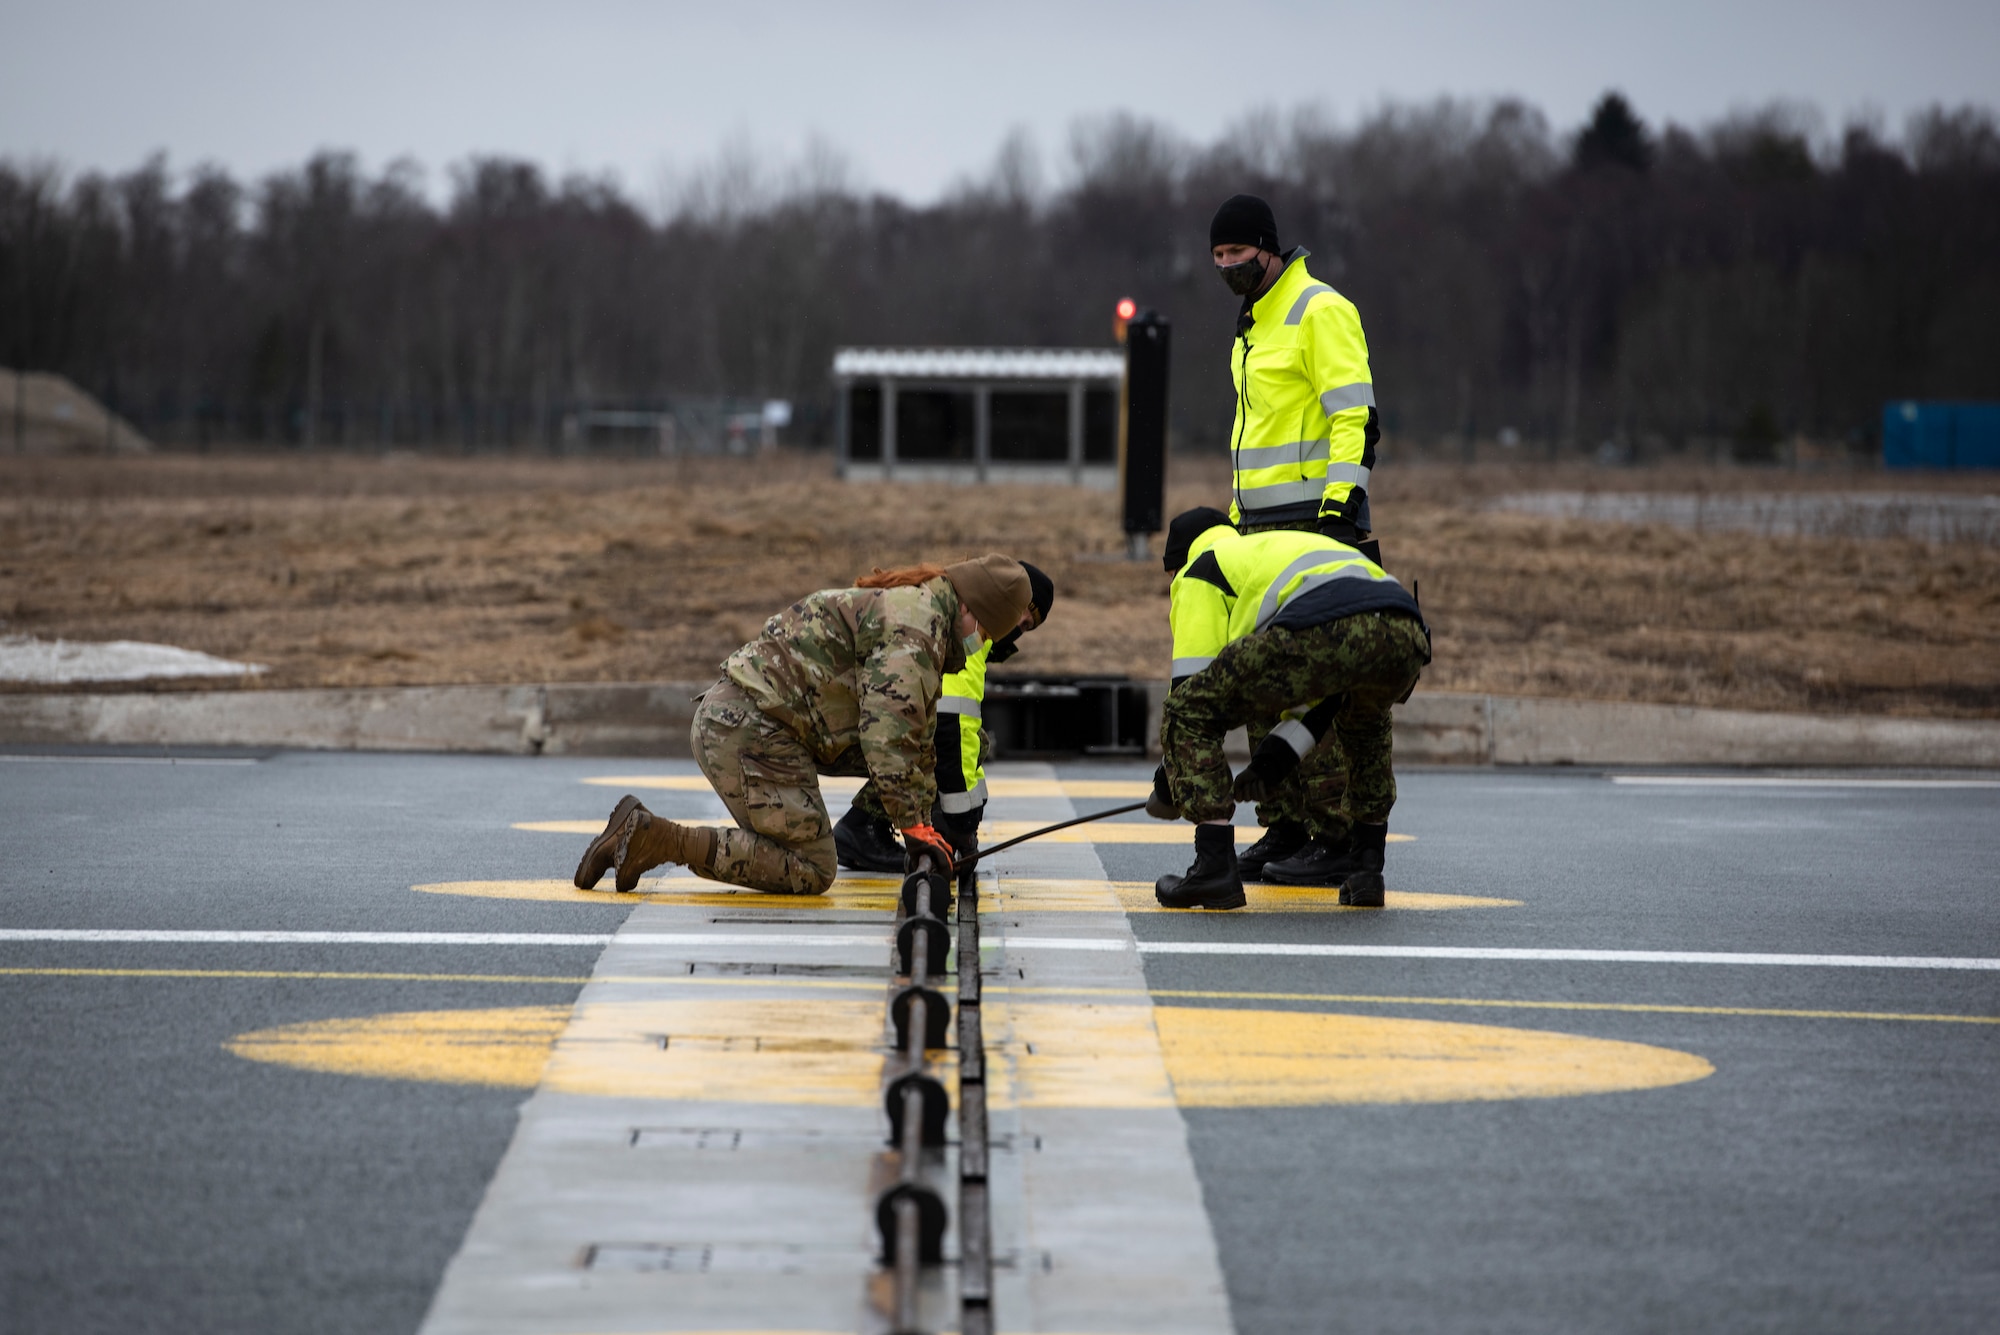 U.S. Air Force Airman 1st Class Chelsea Glasscock, 435th Construction and Training Squadron Aircraft Arresting System Depot apprentice, works with Ämari Air Base personnel to return the system to its starting position during a Barrier Arresting Kit certification at Ämari AB, Estonia, March 17, 2021. The BAK is certified annually to test the stability and effectiveness of the system, which acts as a braking mechanism to stop the aircraft in the event of an emergency that would prevent the aircraft from performing a standard landing. (U.S. Air Force photo by Airman 1st Class Jessi Monte)